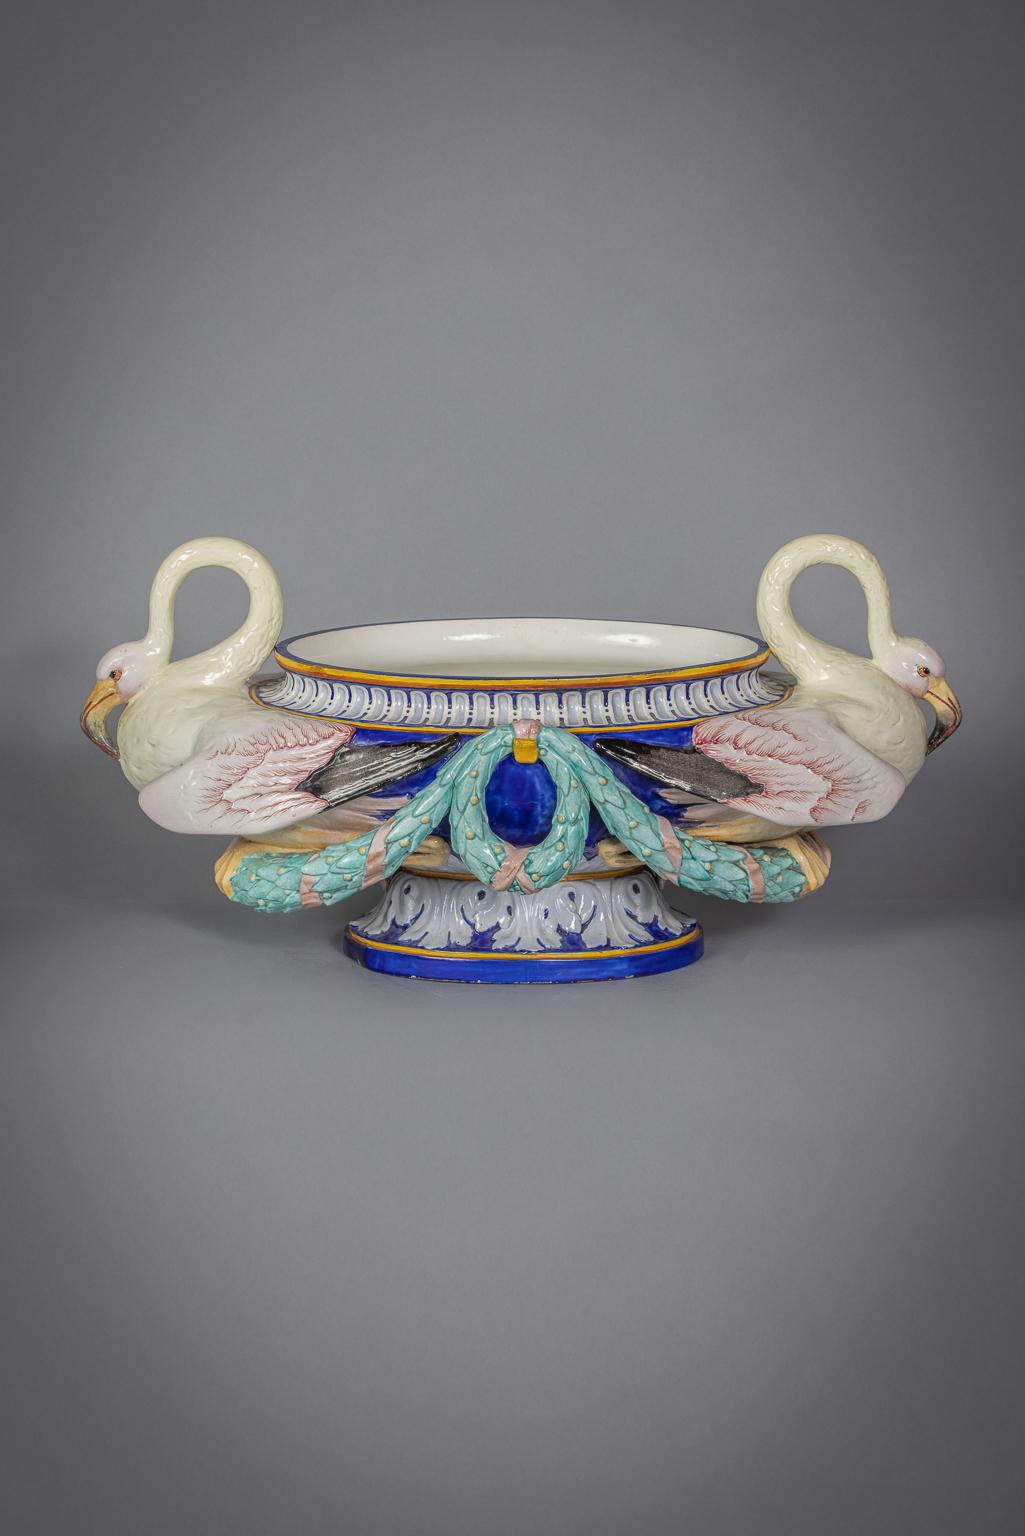 Probably by Villeroy and Boch. Molded at each end with two large pink and cream flamingoes.